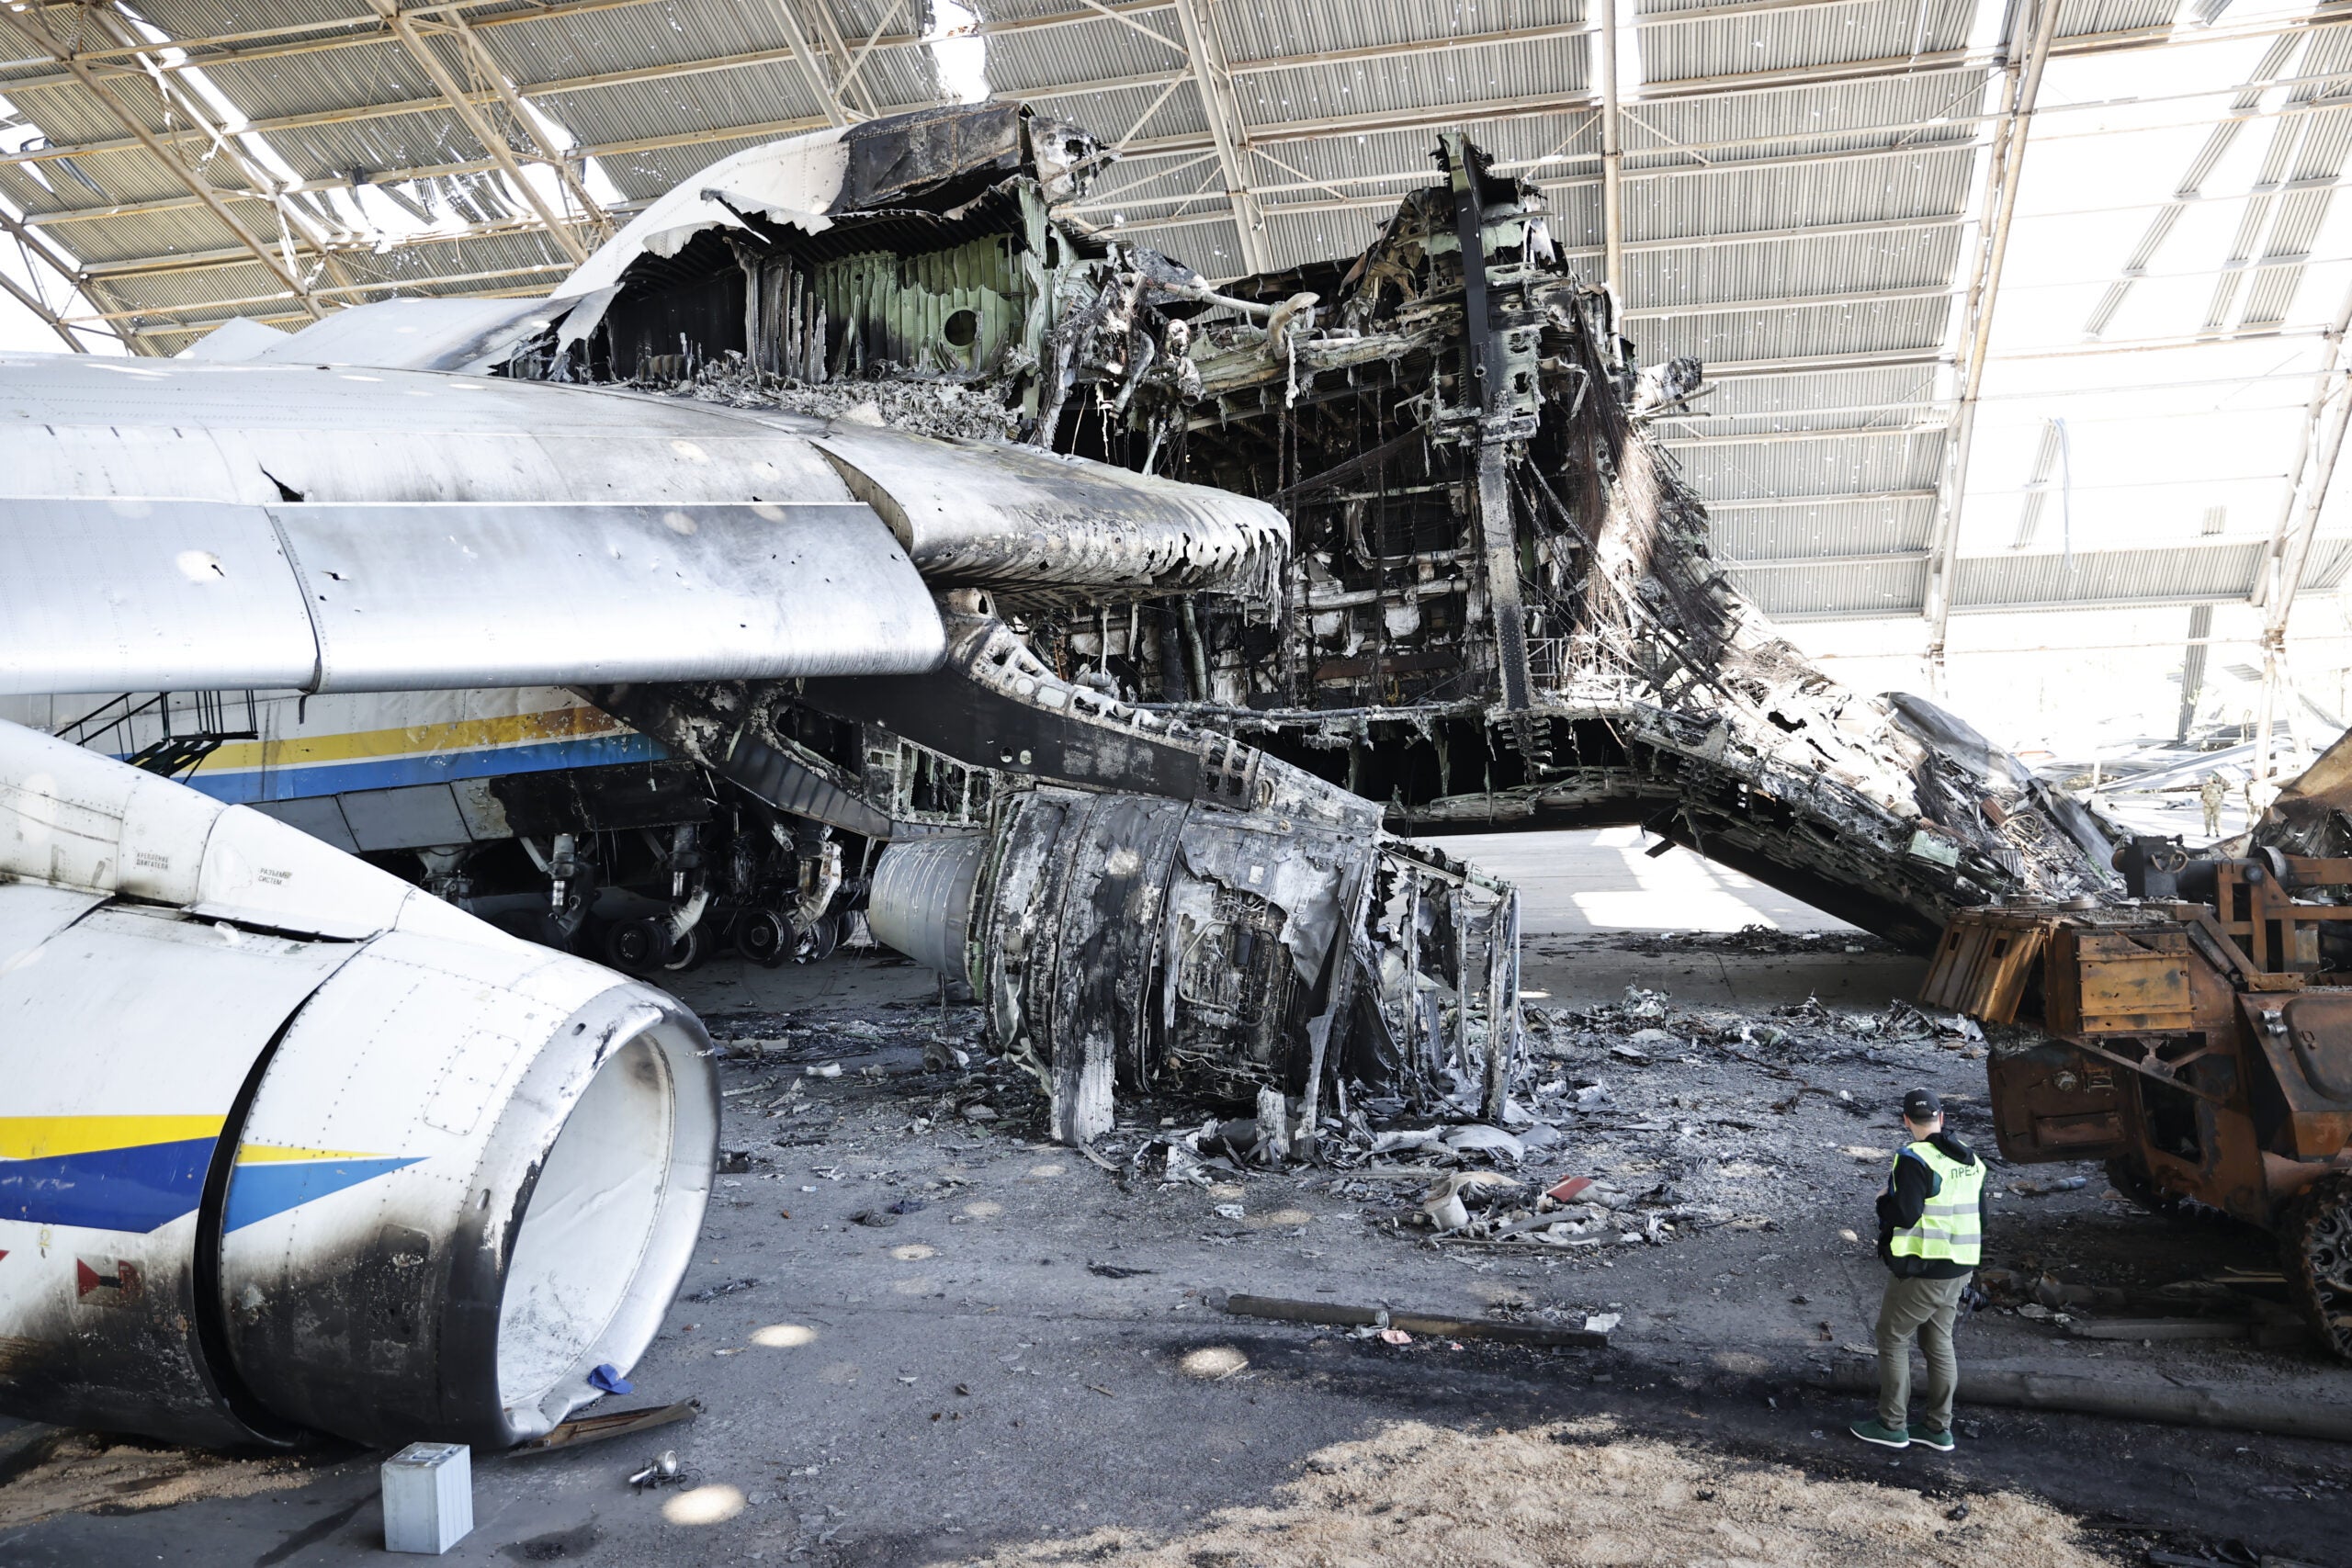 HOSTOMEL, UKRAINE - MAY 5: A view of the wreckage of the Antonov An-225 Mriya, the world's largest cargo plane, at an airshed after it was destroyed by Russia's attacks on Ukraine as cleaning works continue at Antonov Airport in Hostomel, Ukraine on May 5, 2022. (Photo by Dogukan Keskinkilic/Anadolu Agency via Getty Images)